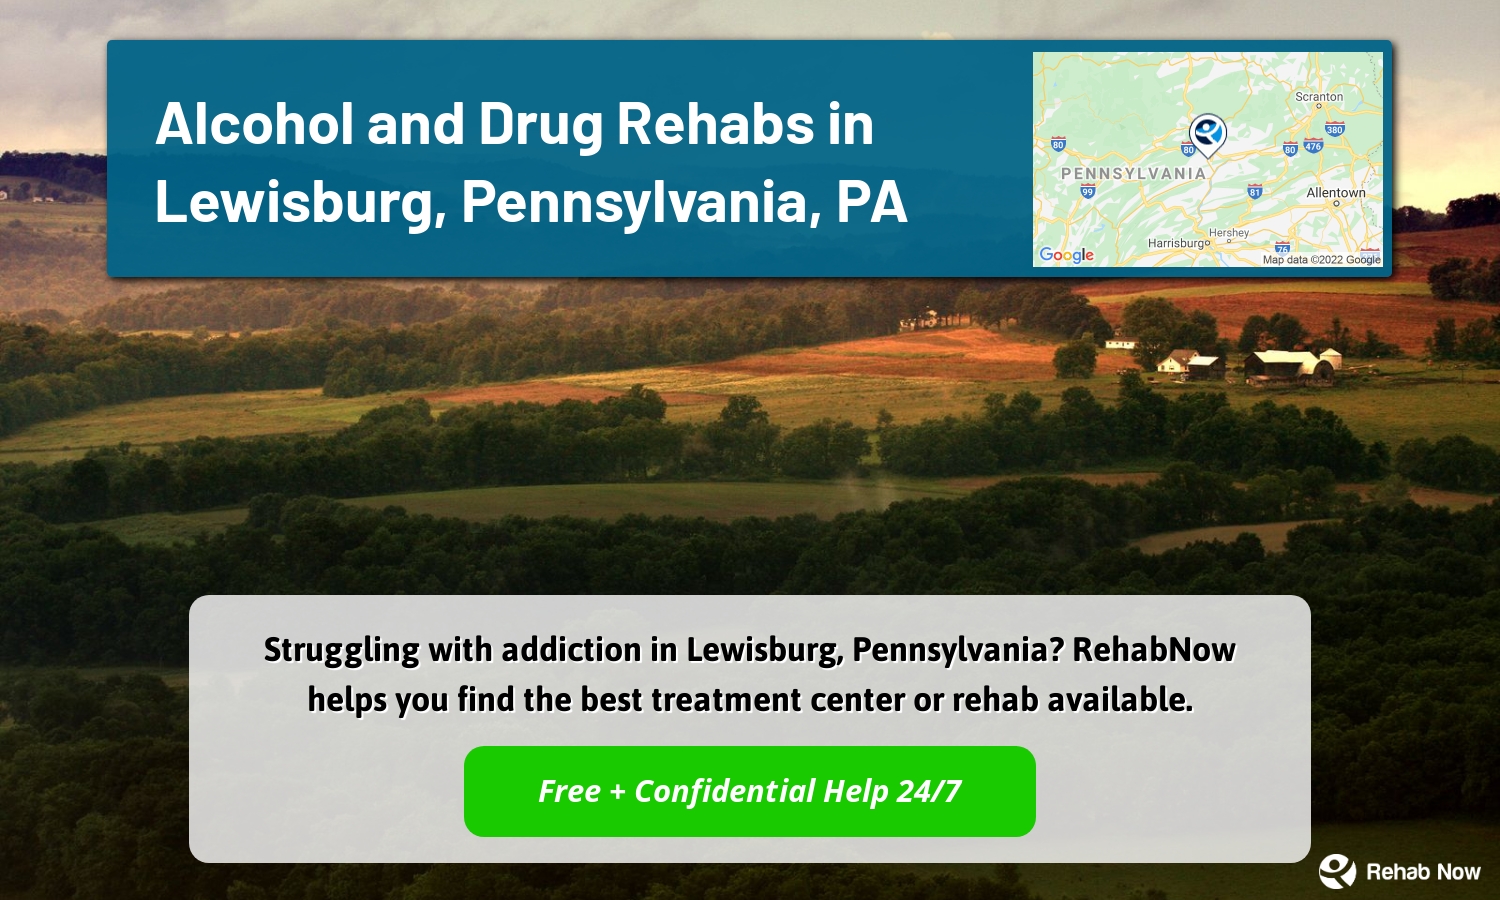 Struggling with addiction in Lewisburg, Pennsylvania? RehabNow helps you find the best treatment center or rehab available.